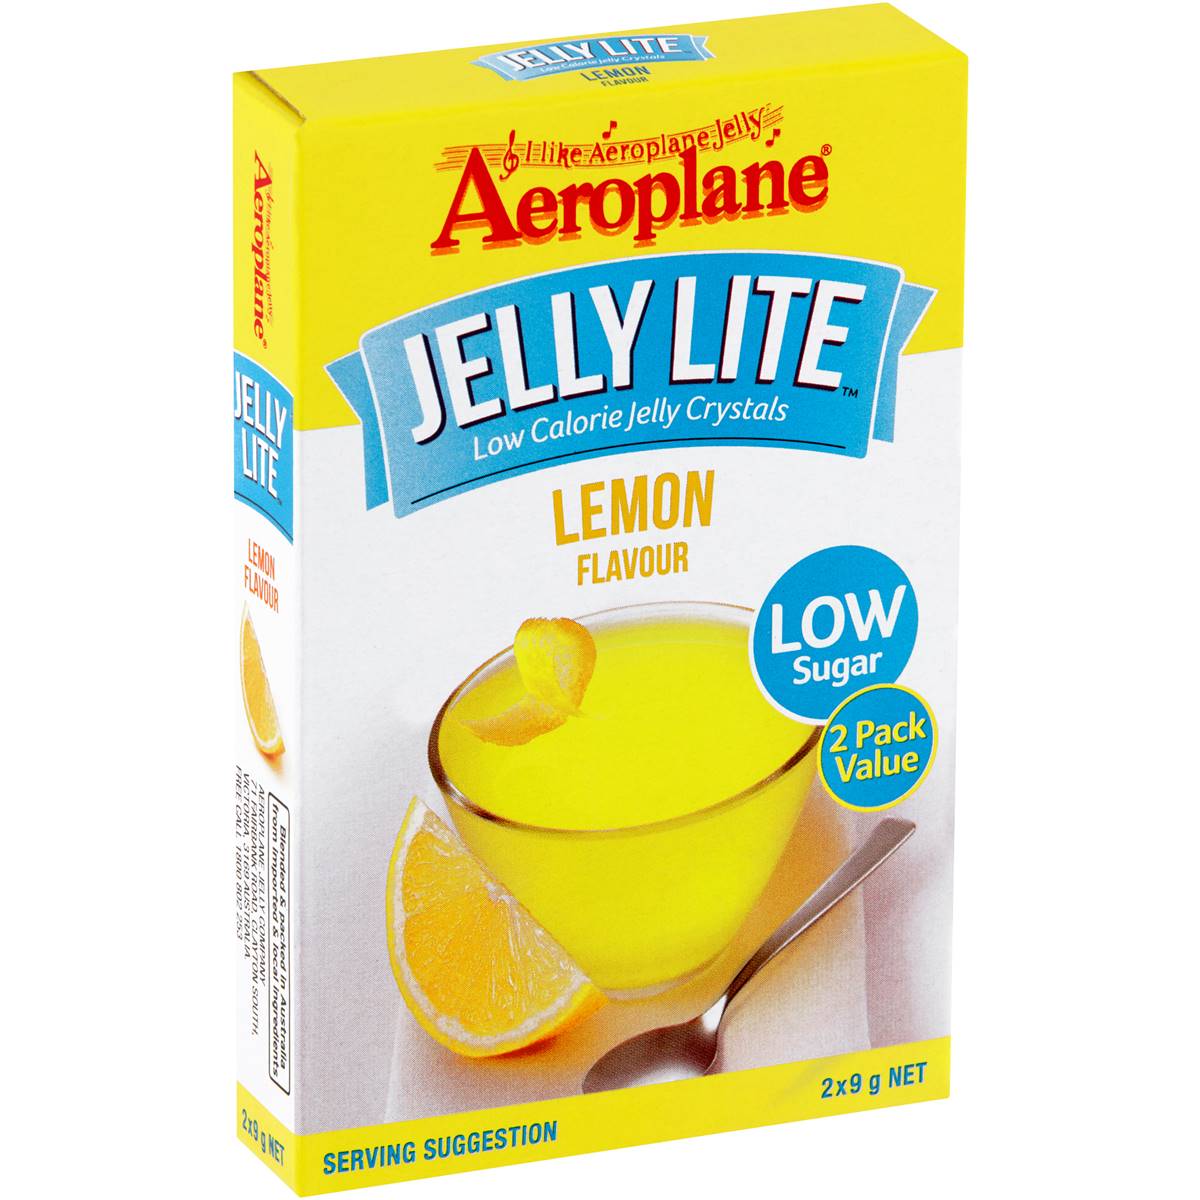 Calories in Aeroplane Jelly Lite Lemon Flavour Low Calorie Jelly Crystals